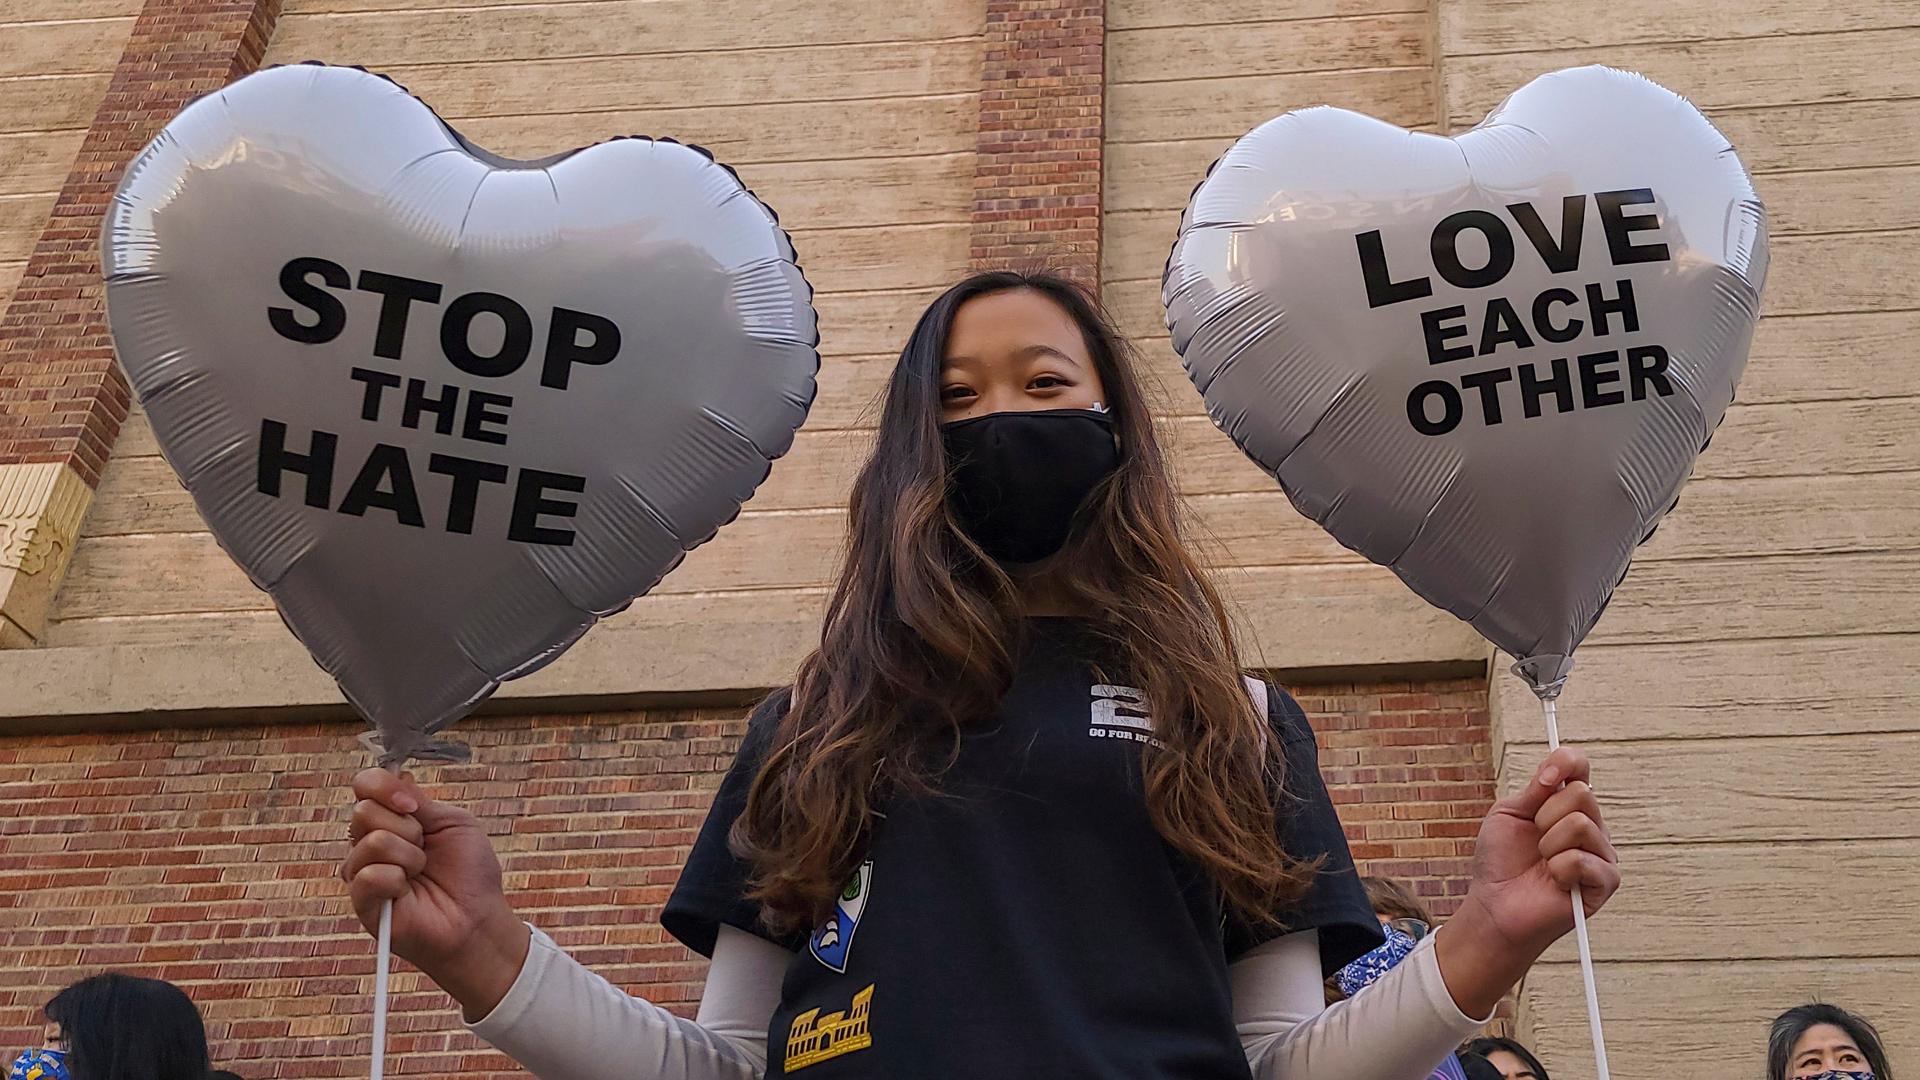 A young person holds up two balloons in heart-shapes that read Stop the Hate and Love Each Other